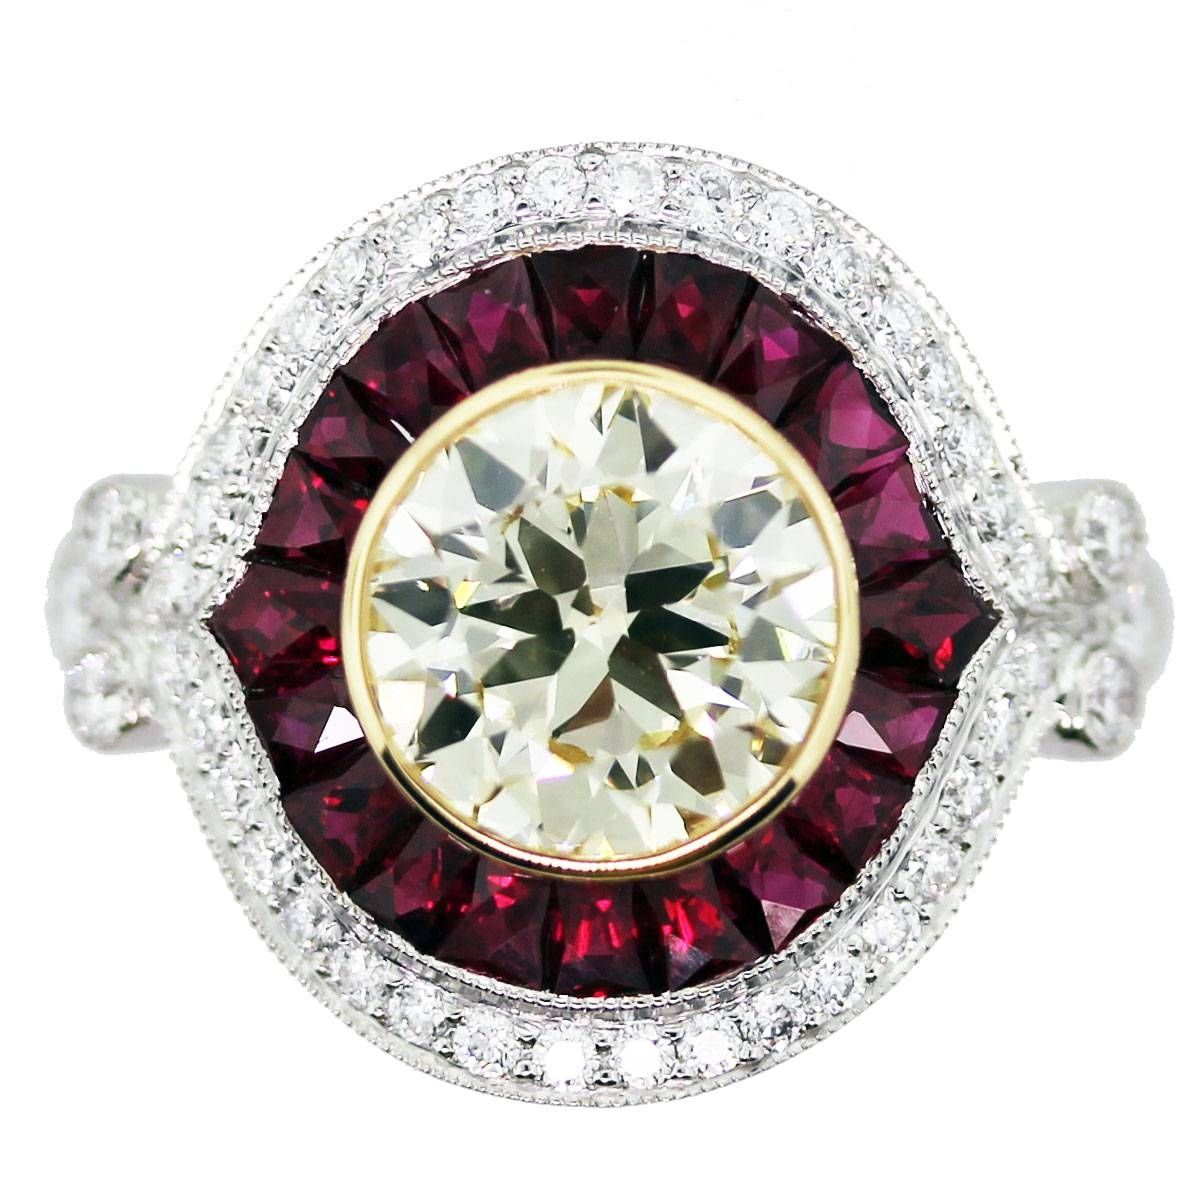 2 Carat Halo Style Engagement Ring Boca Raton Intended For Ruby And Diamond Engagement Rings (View 12 of 15)